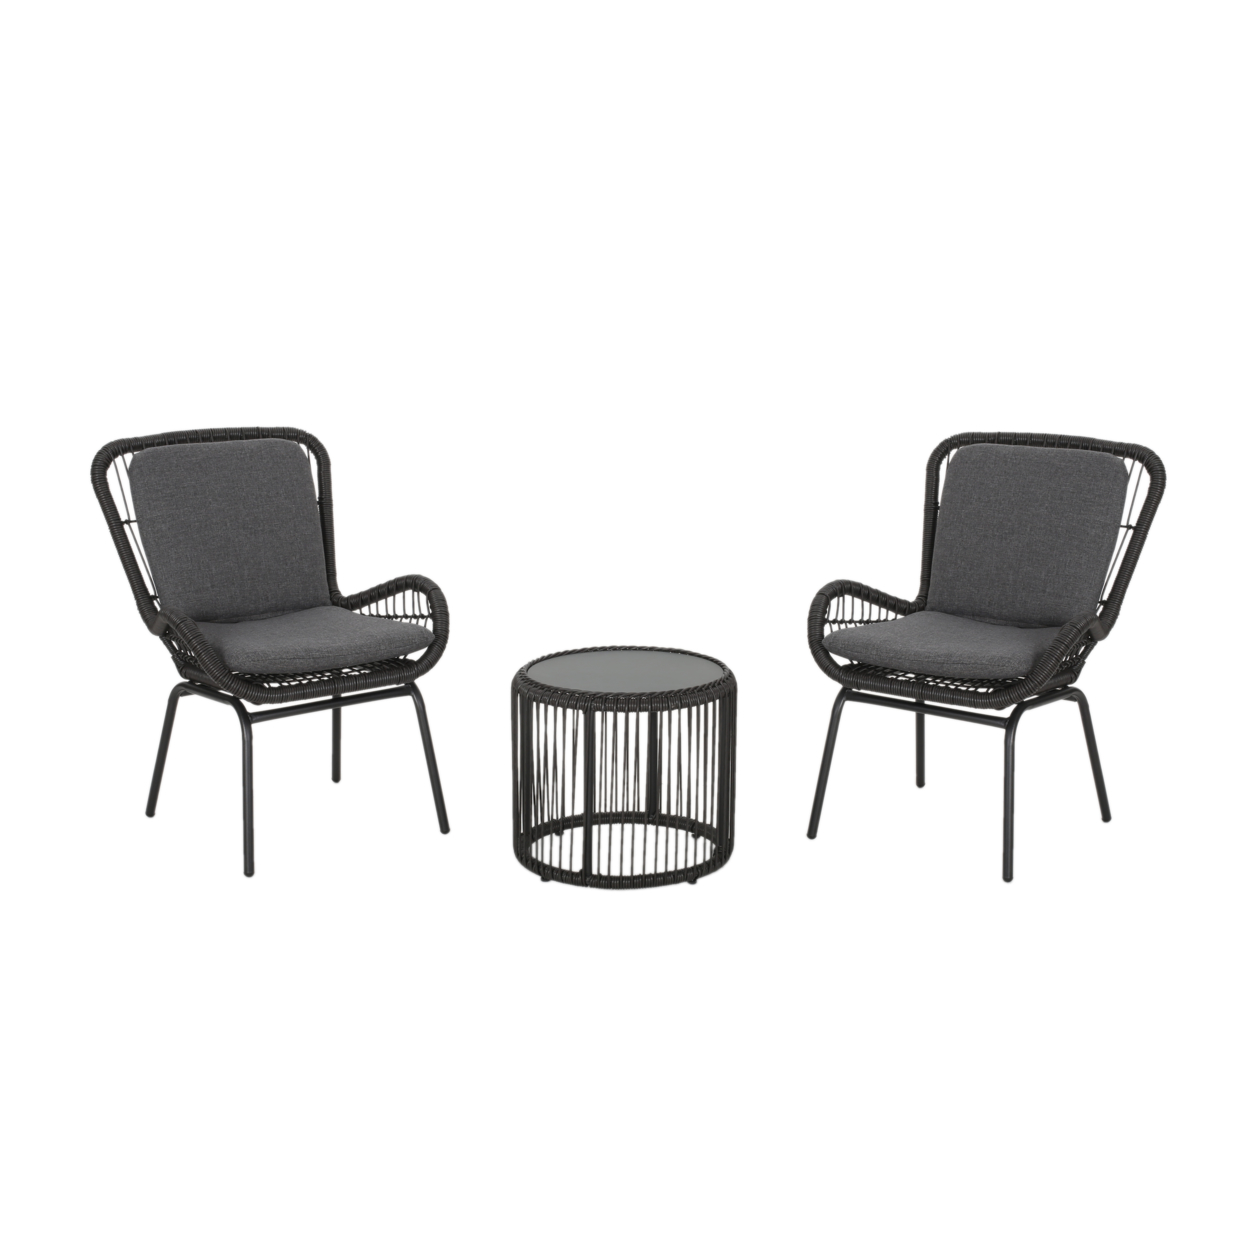 Belle Outdoor Wicker Chat Set With Cushions - Gray + Dark Gray + Black